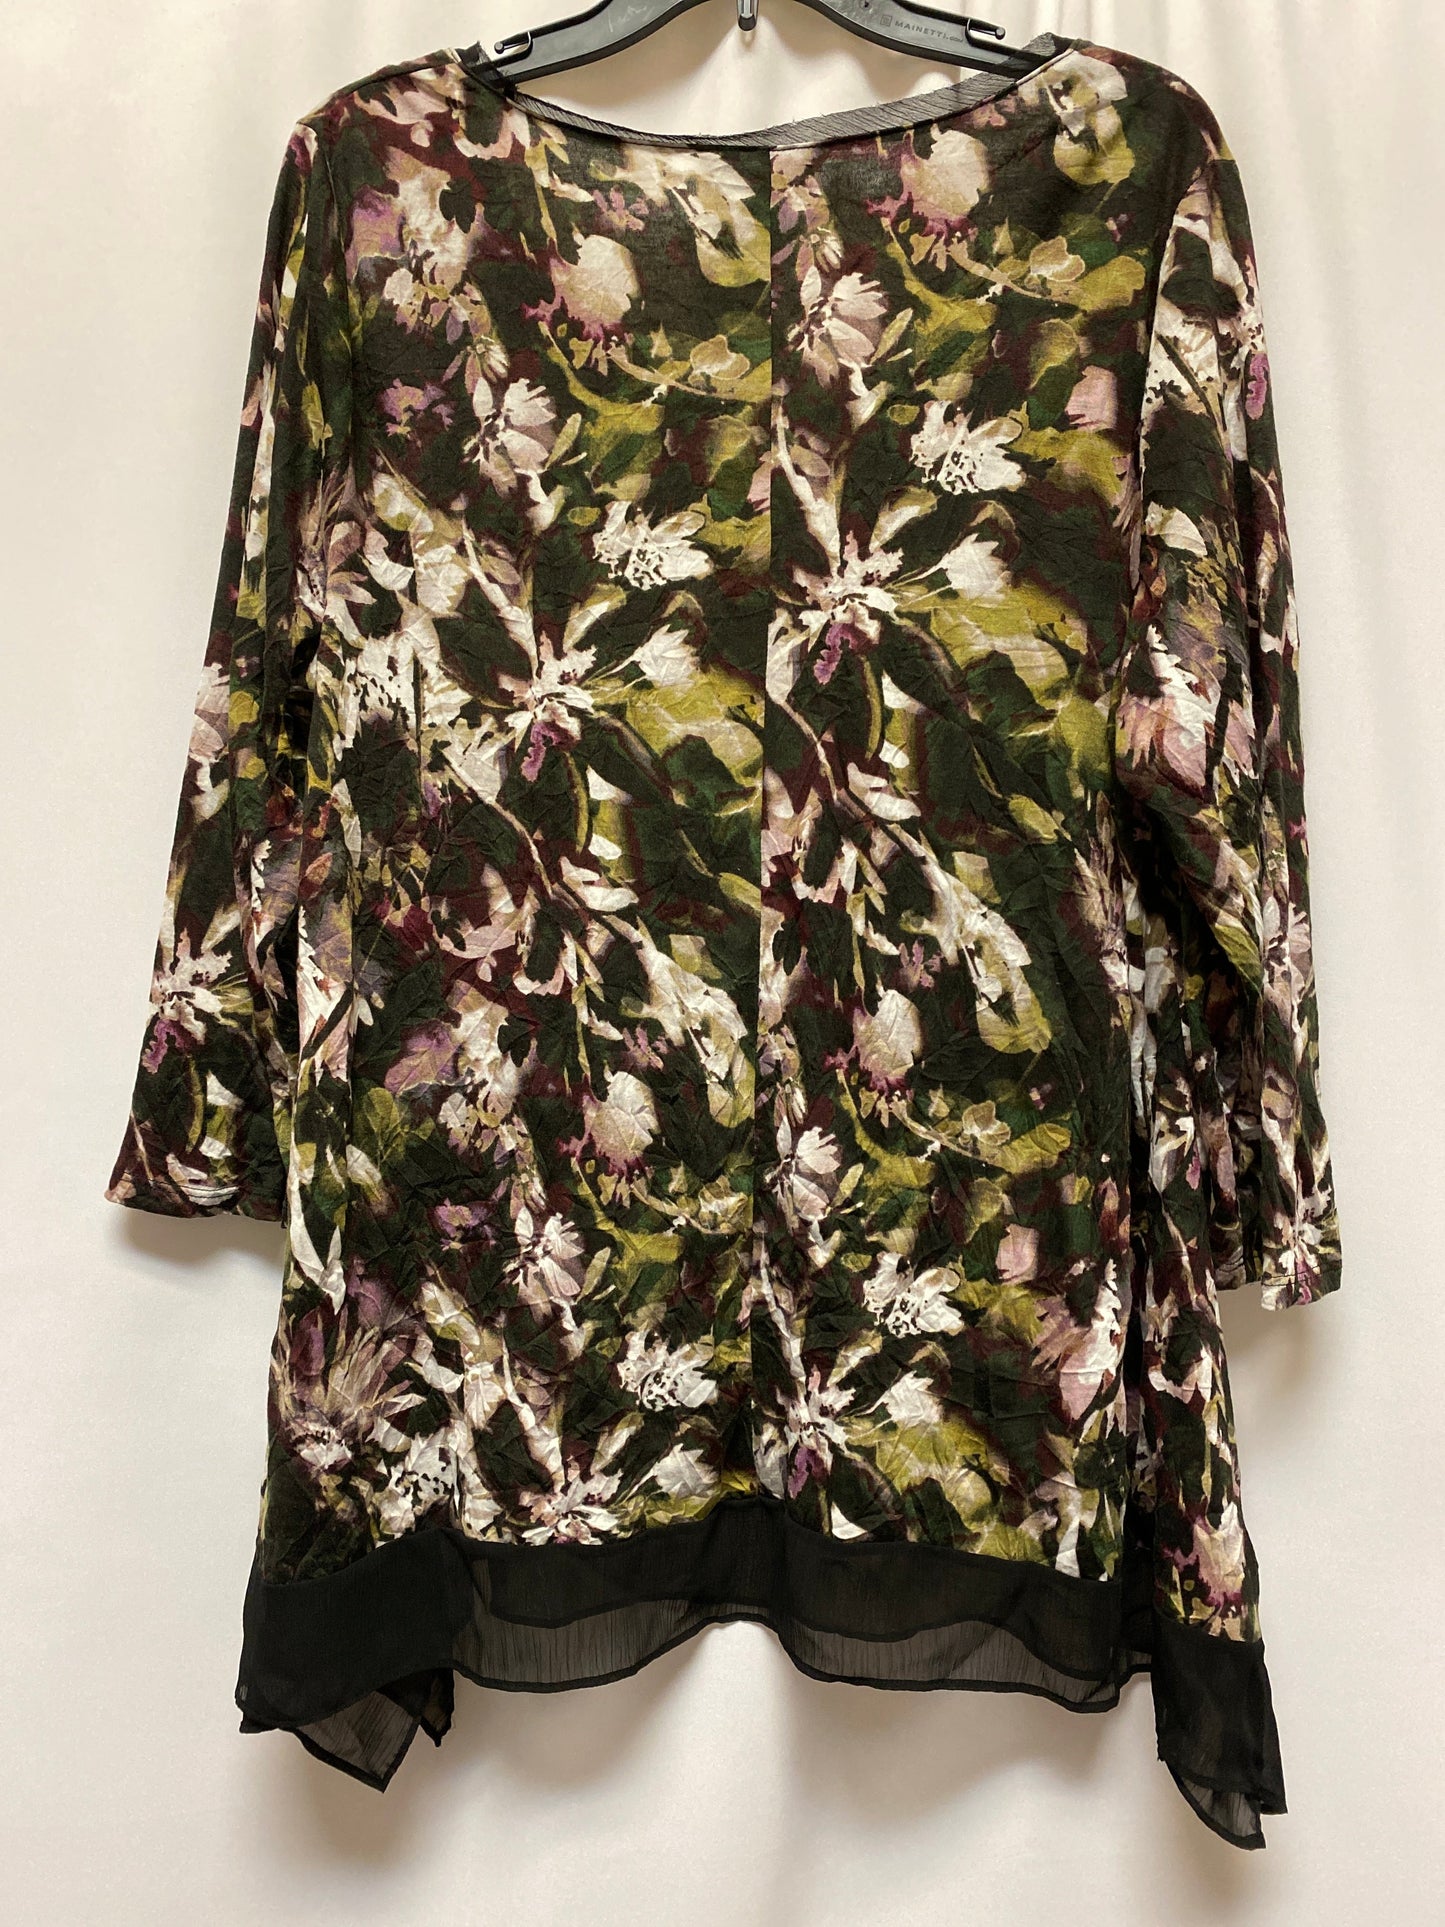 Green Top Long Sleeve Simply Vera, Size 1x